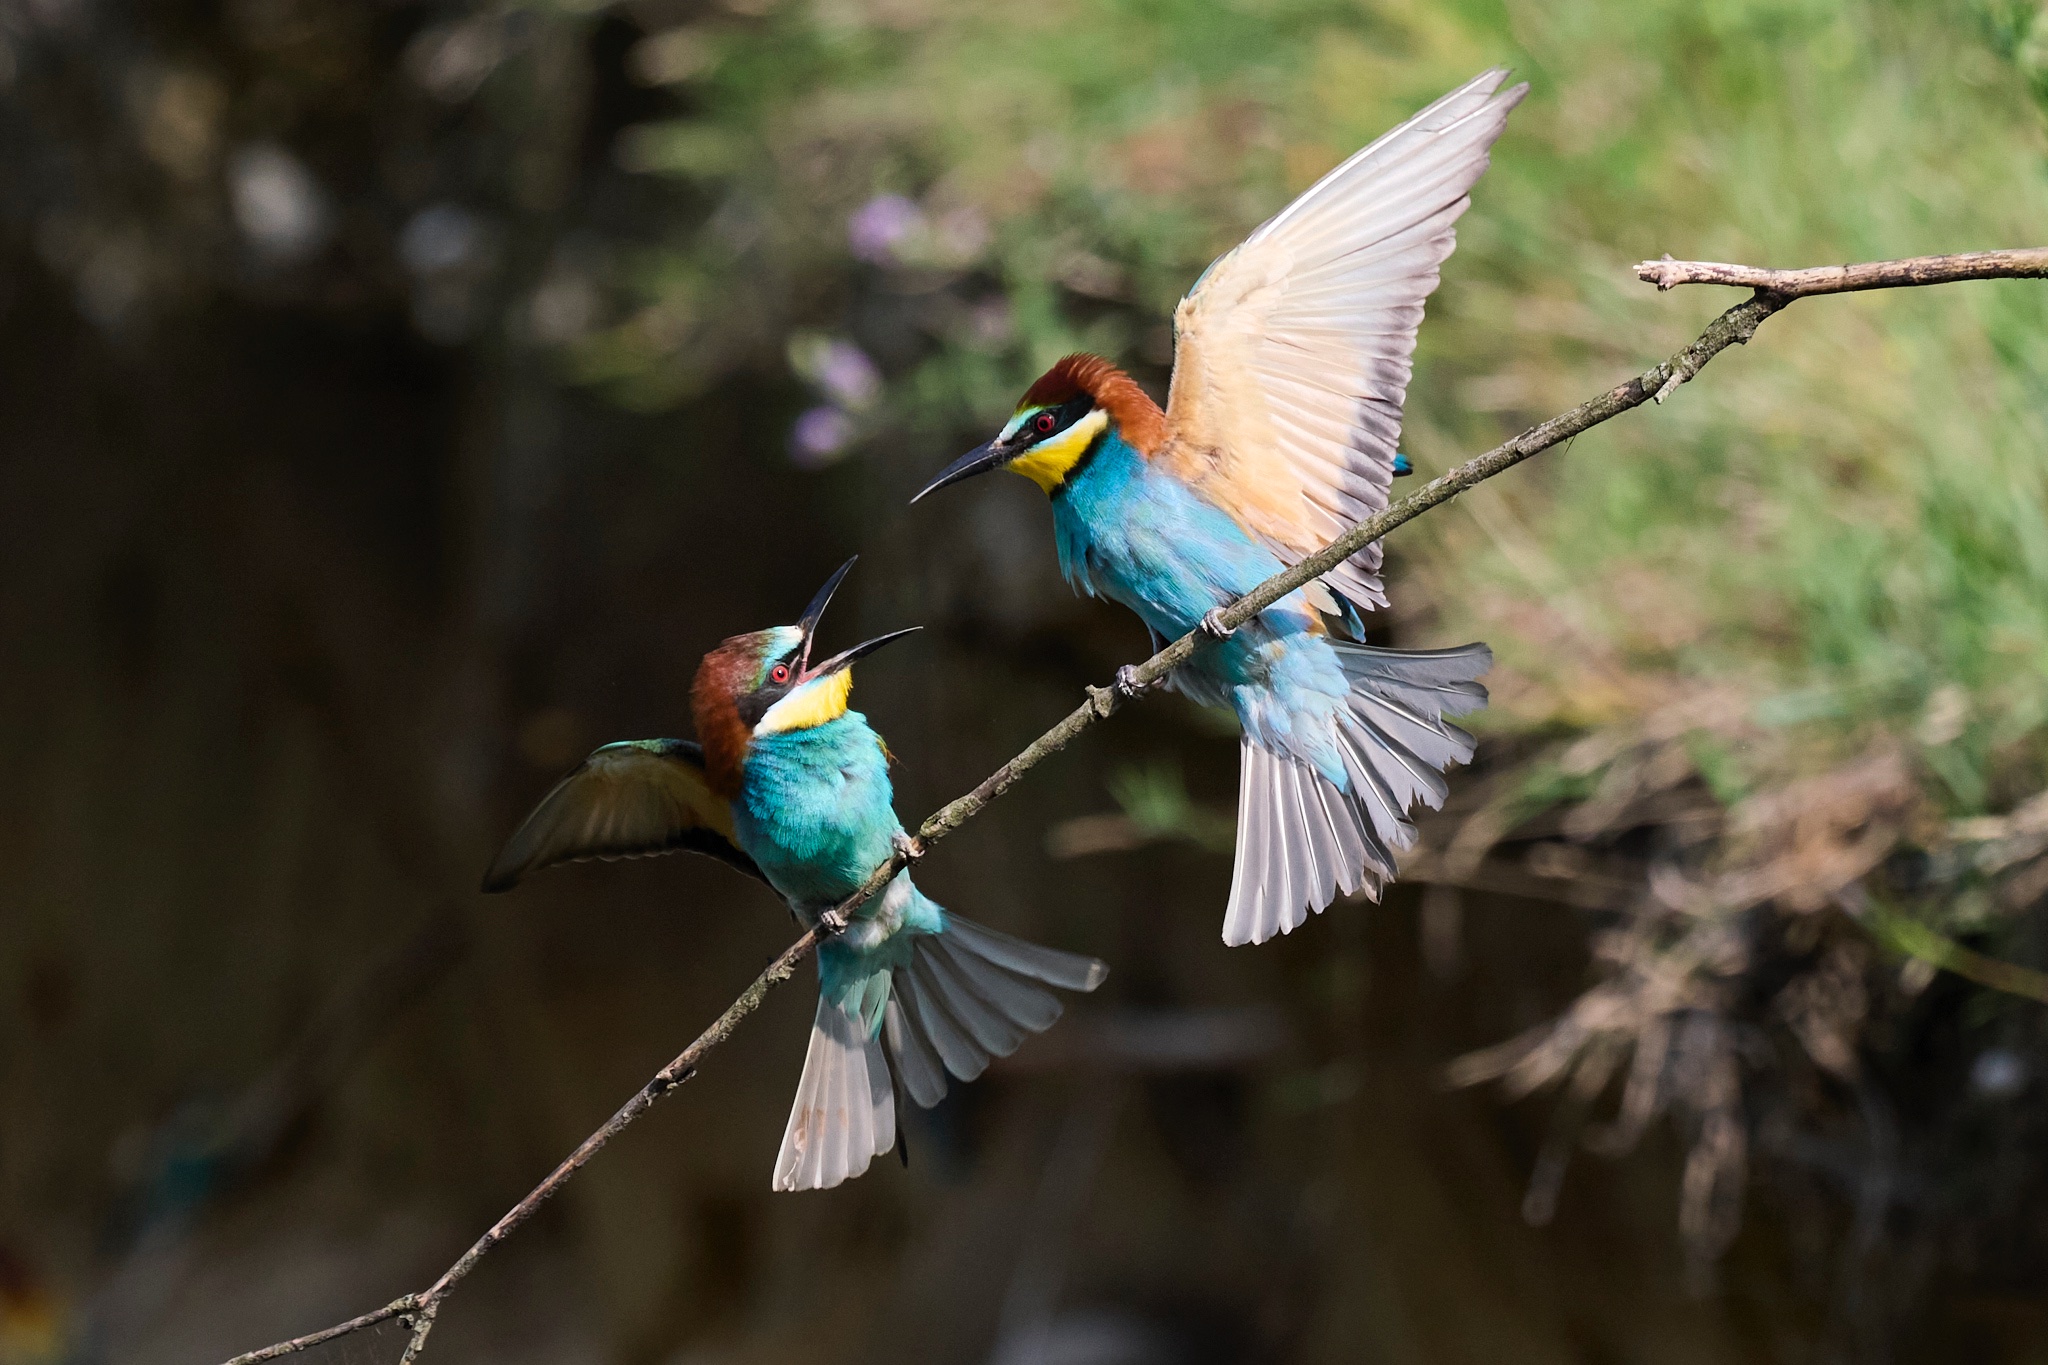 Bee-eater discussion...